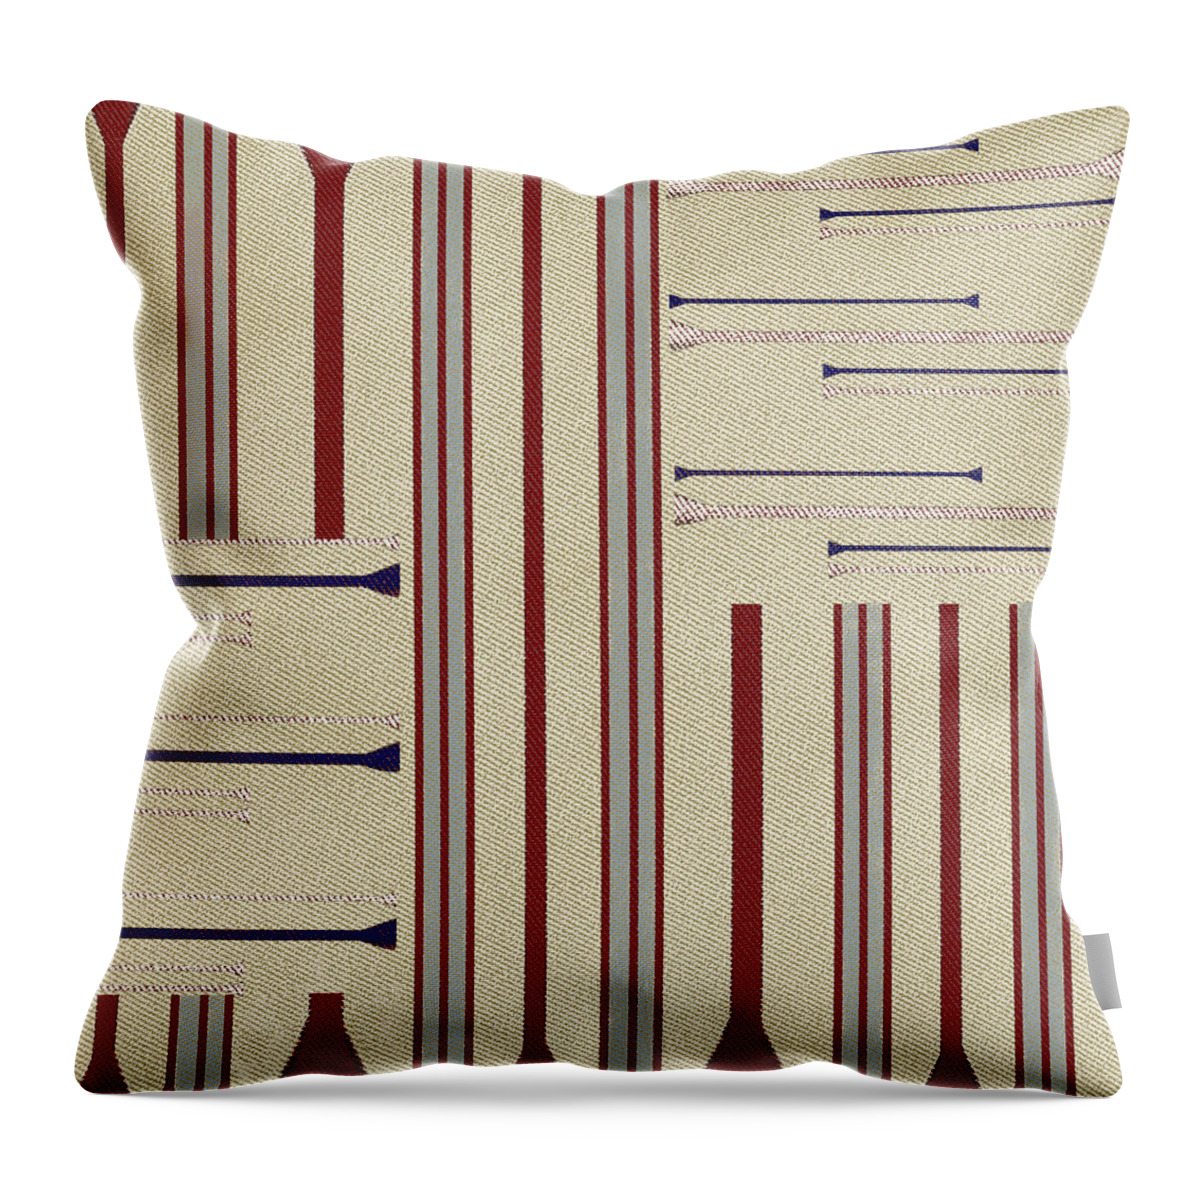 Stripe Throw Pillow featuring the digital art Modern African Ticking Stripe by Sand And Chi